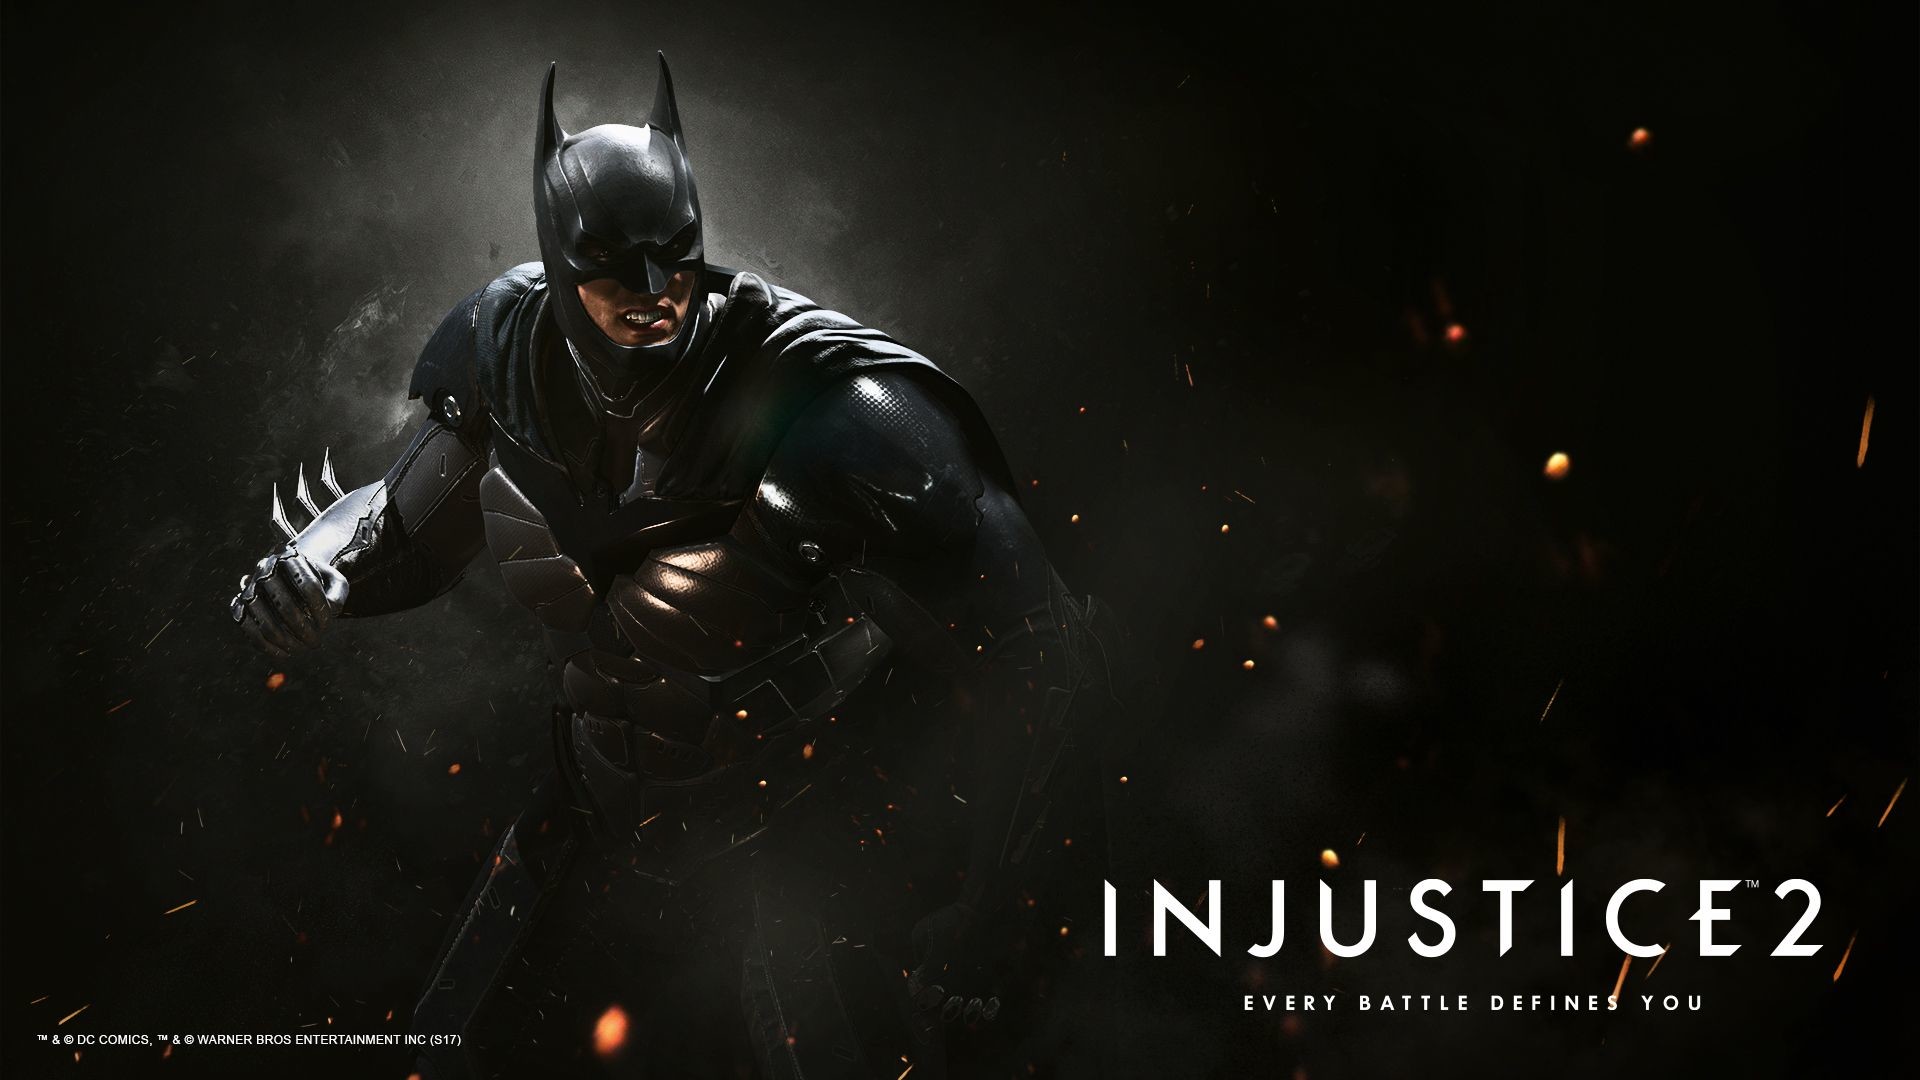 Injustice 2 Wallpapers 81 images